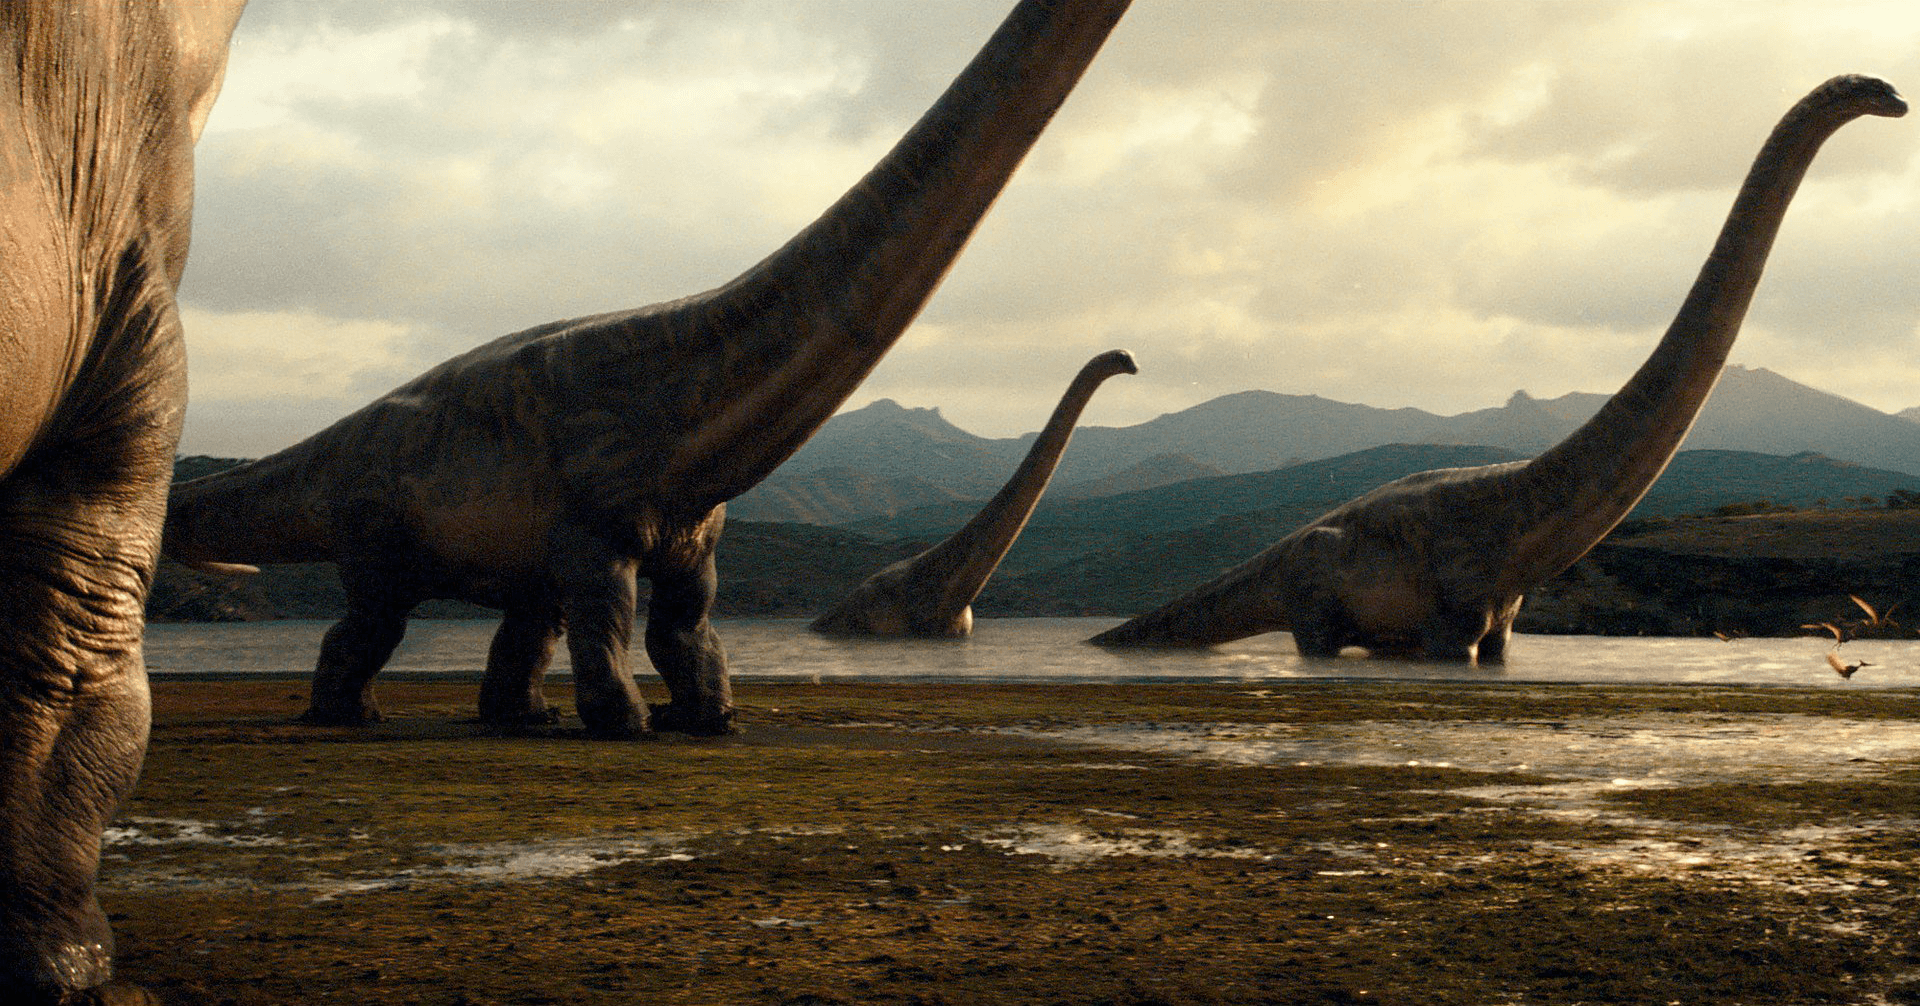 Next Jurassic World Movie Confirmed to Film in UK at Sky Studios Elstree This Year